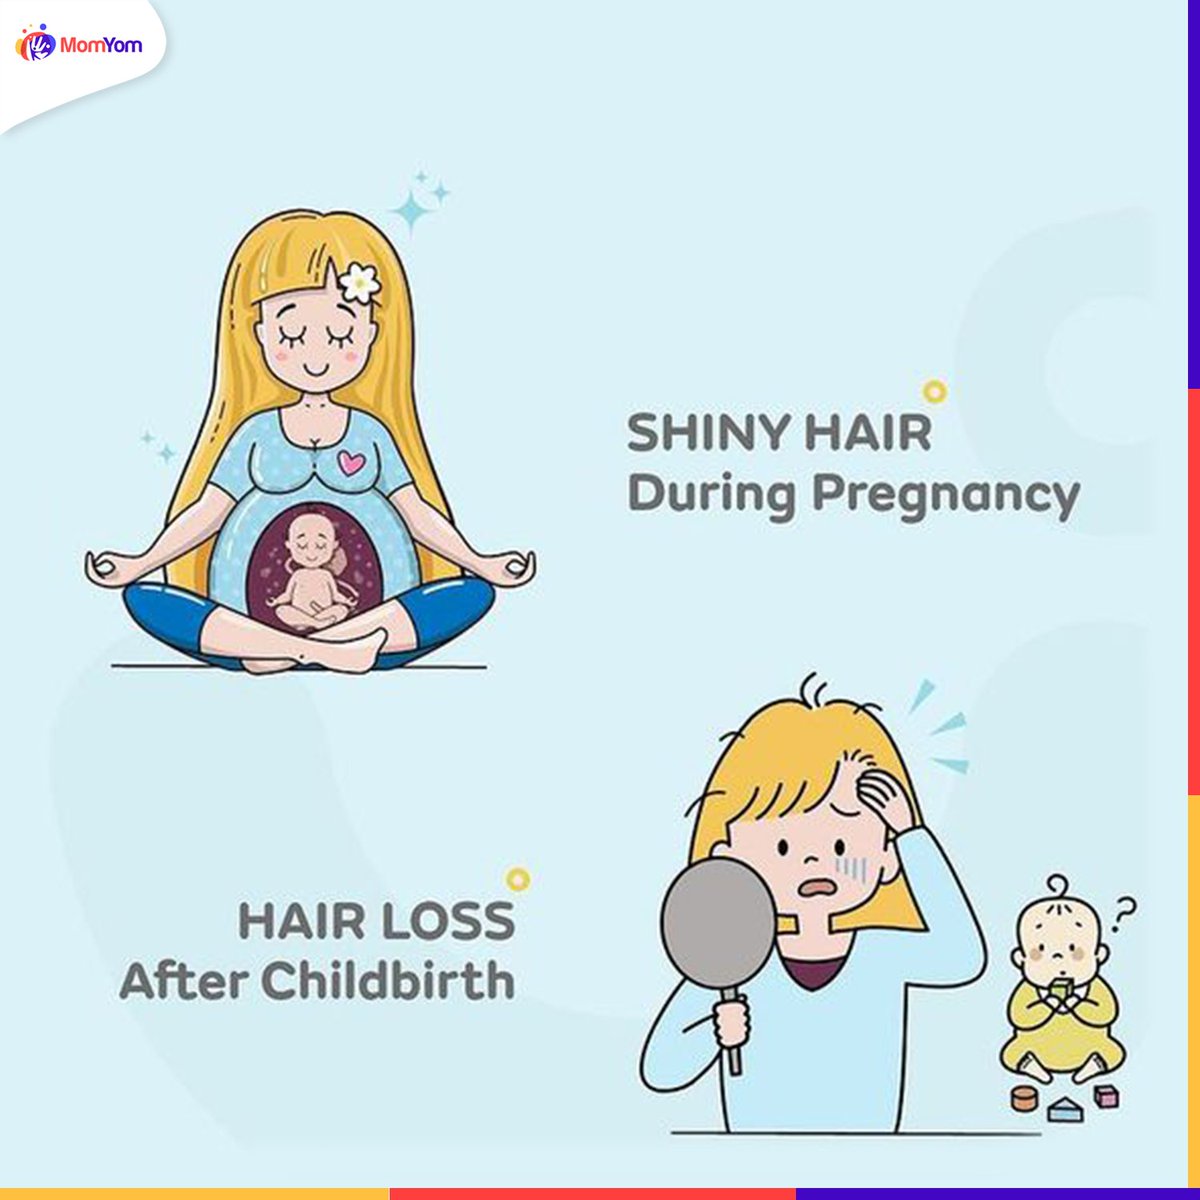 From Glorious to Graceful: Pregnancy brings shinier hair, but don't fret about postpartum hair loss – it's all part of the beautiful journey of motherhood. 💫👶 

#MotherhoodJourney #PregnancyShine #PostpartumHairLoss #MomLife